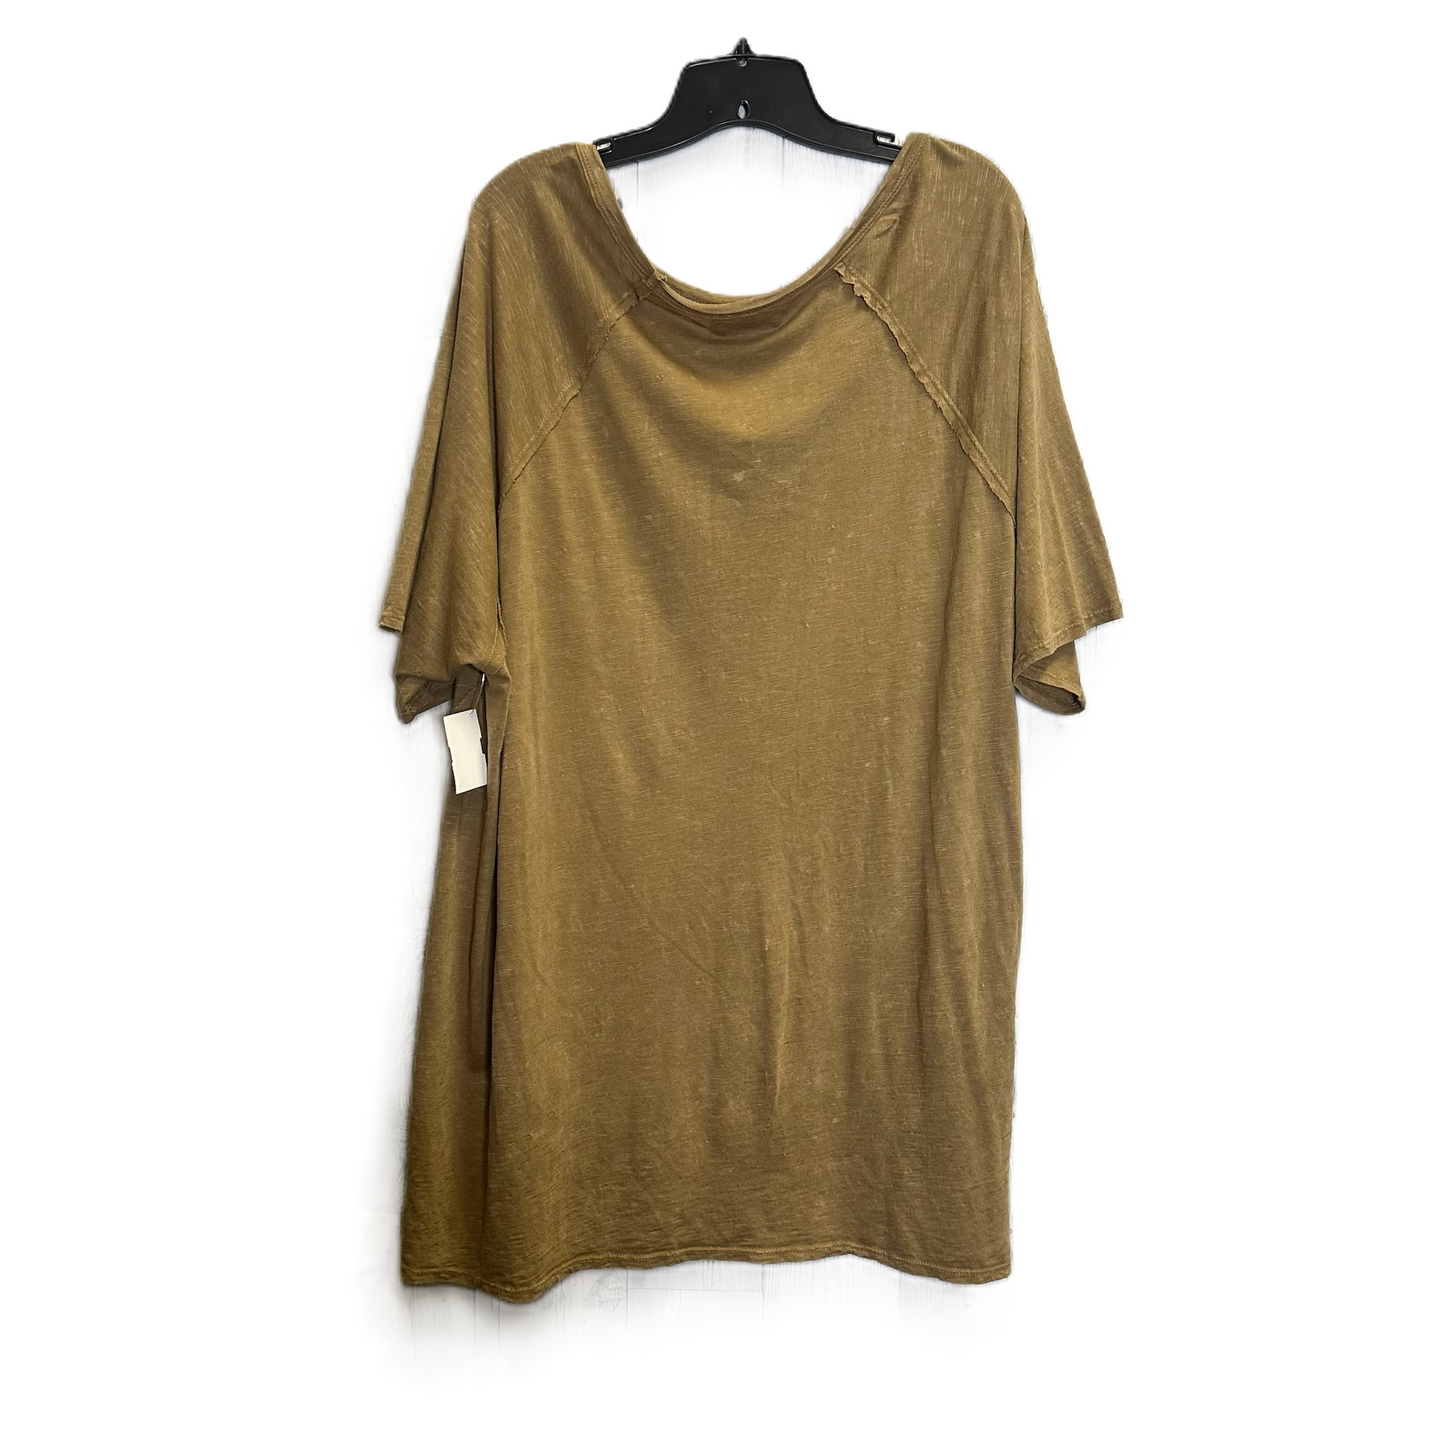 Brown Top Short Sleeve Basic By Clothes Mentor, Size: L